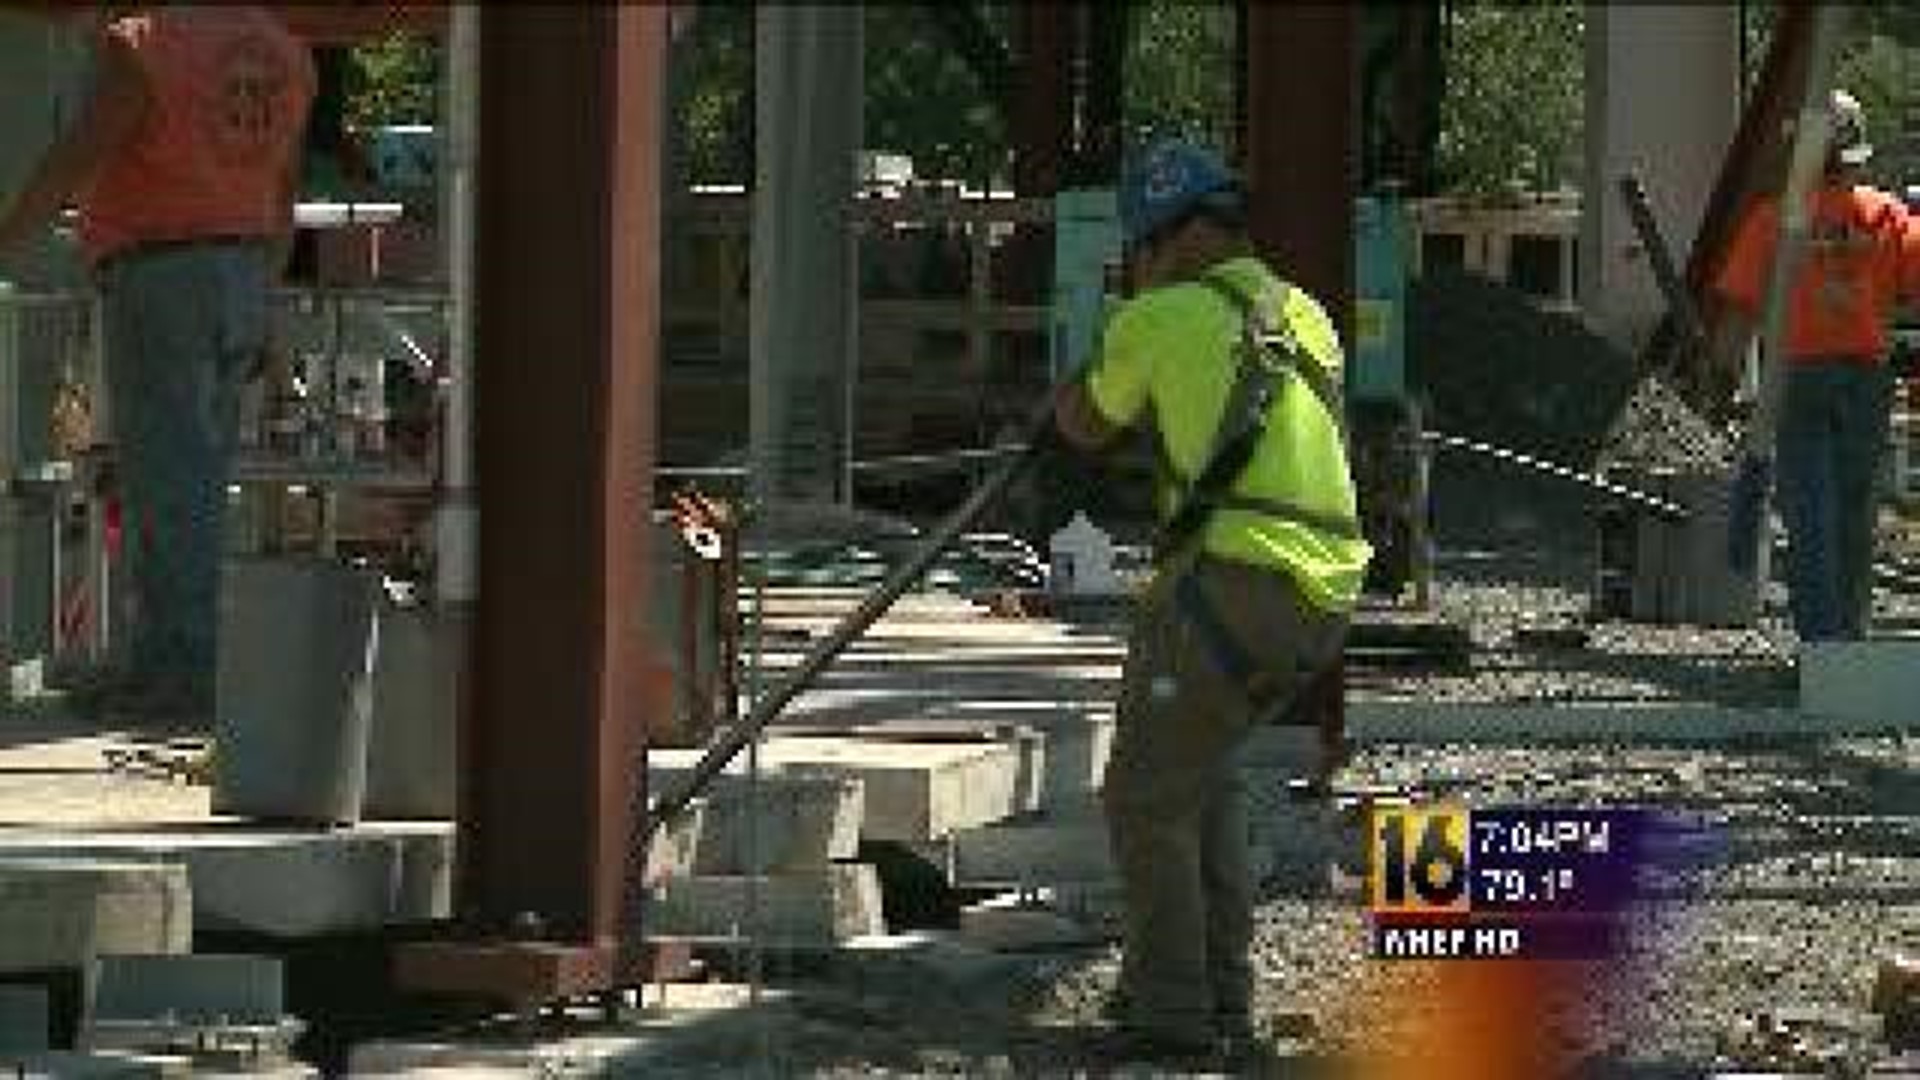 Demolition Over, Construction Underway at PNC Field